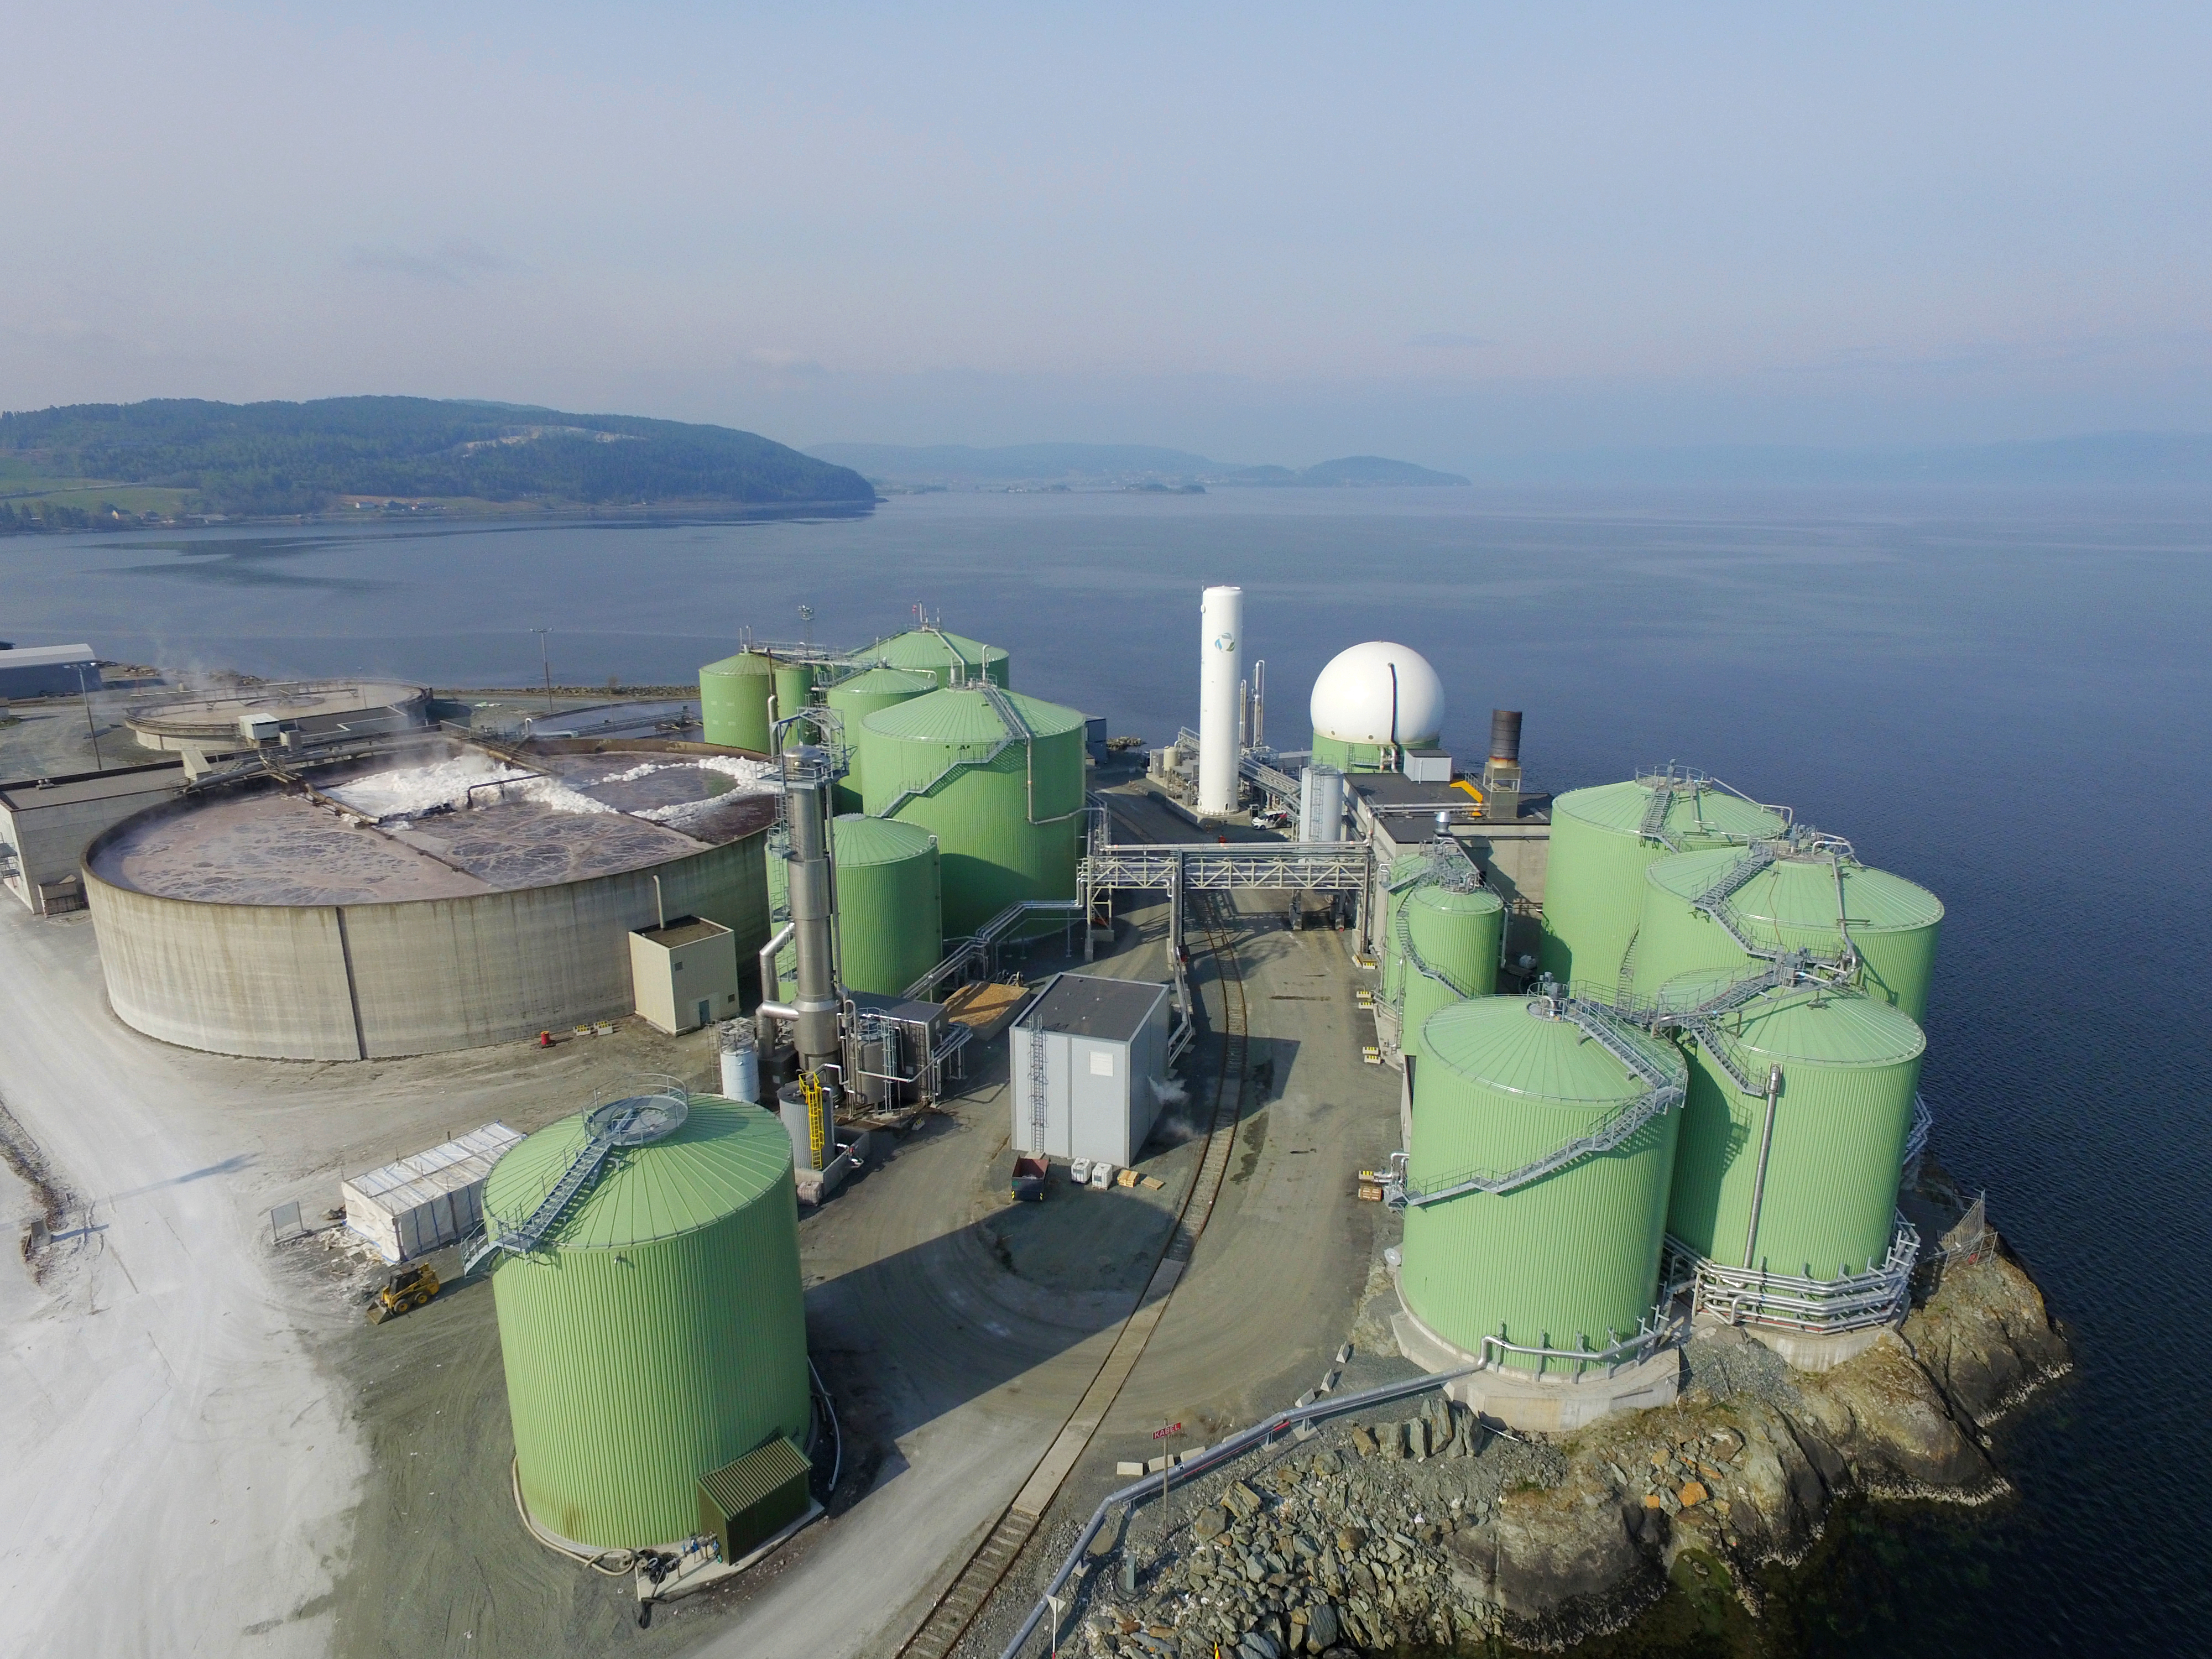 Andion’s extensive experience in the engineering and design of complex anaerobic digestion systems for varied feedstock will allow Biokraft to streamline operations and expand production capacity at Skogn by executing the Skogn II factory project, with planned construction to commence in late 2020